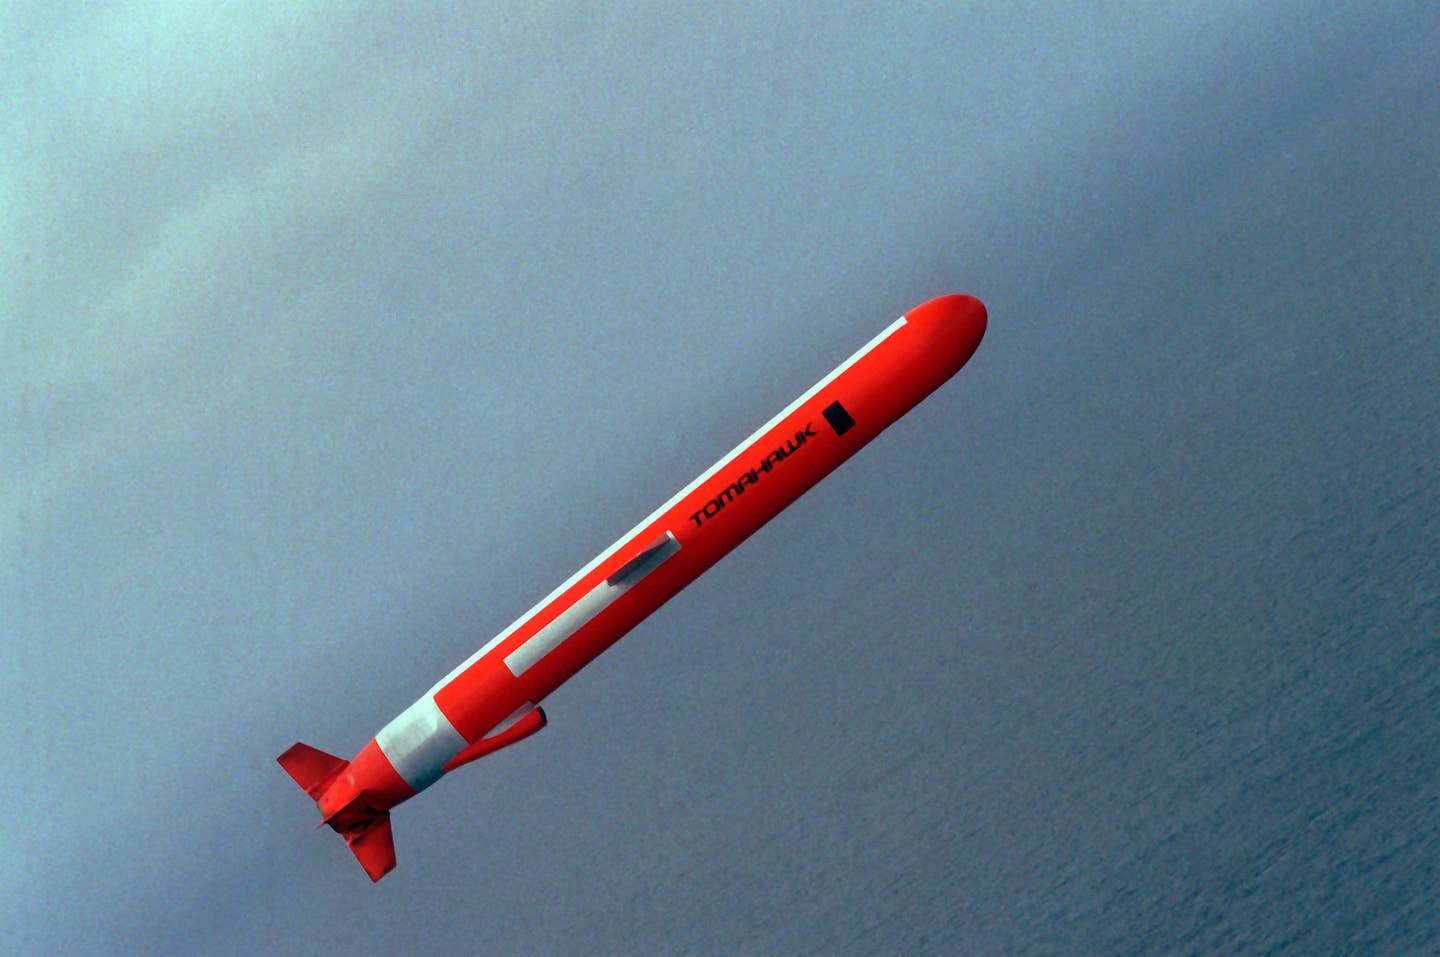 message-editor%2F1636404884013-an_air-to-air_side_view_of_a_bgm-109_tomahawk_missile_in-flight._the_tomahawk_was_launched_from_the_destroyer_uss_merrill_dd-976_on_the_pacific_missile_test_center_range_-_dpla_-_ccc23d9ffbd19292f36526be93c80e4e.jpg